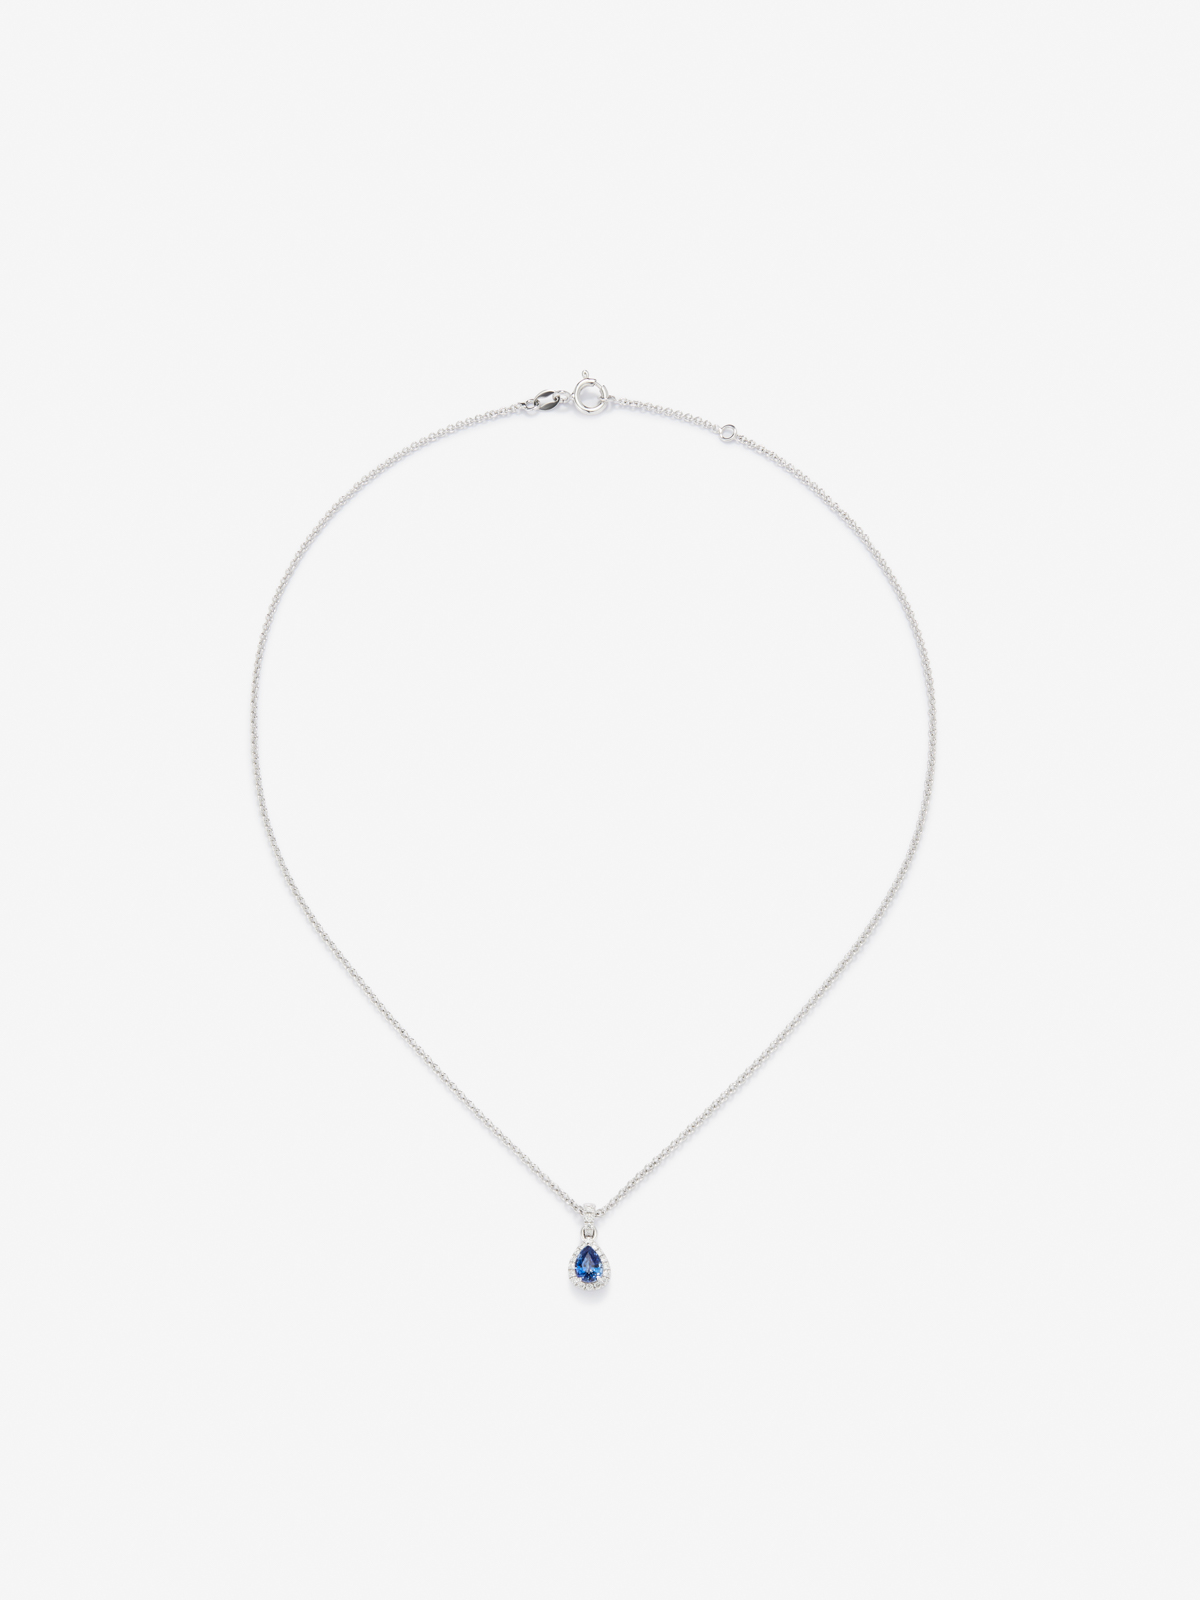 18K white gold pendant with blue zafiro in 0.4 cts and white diamonds in bright 0.08 cts